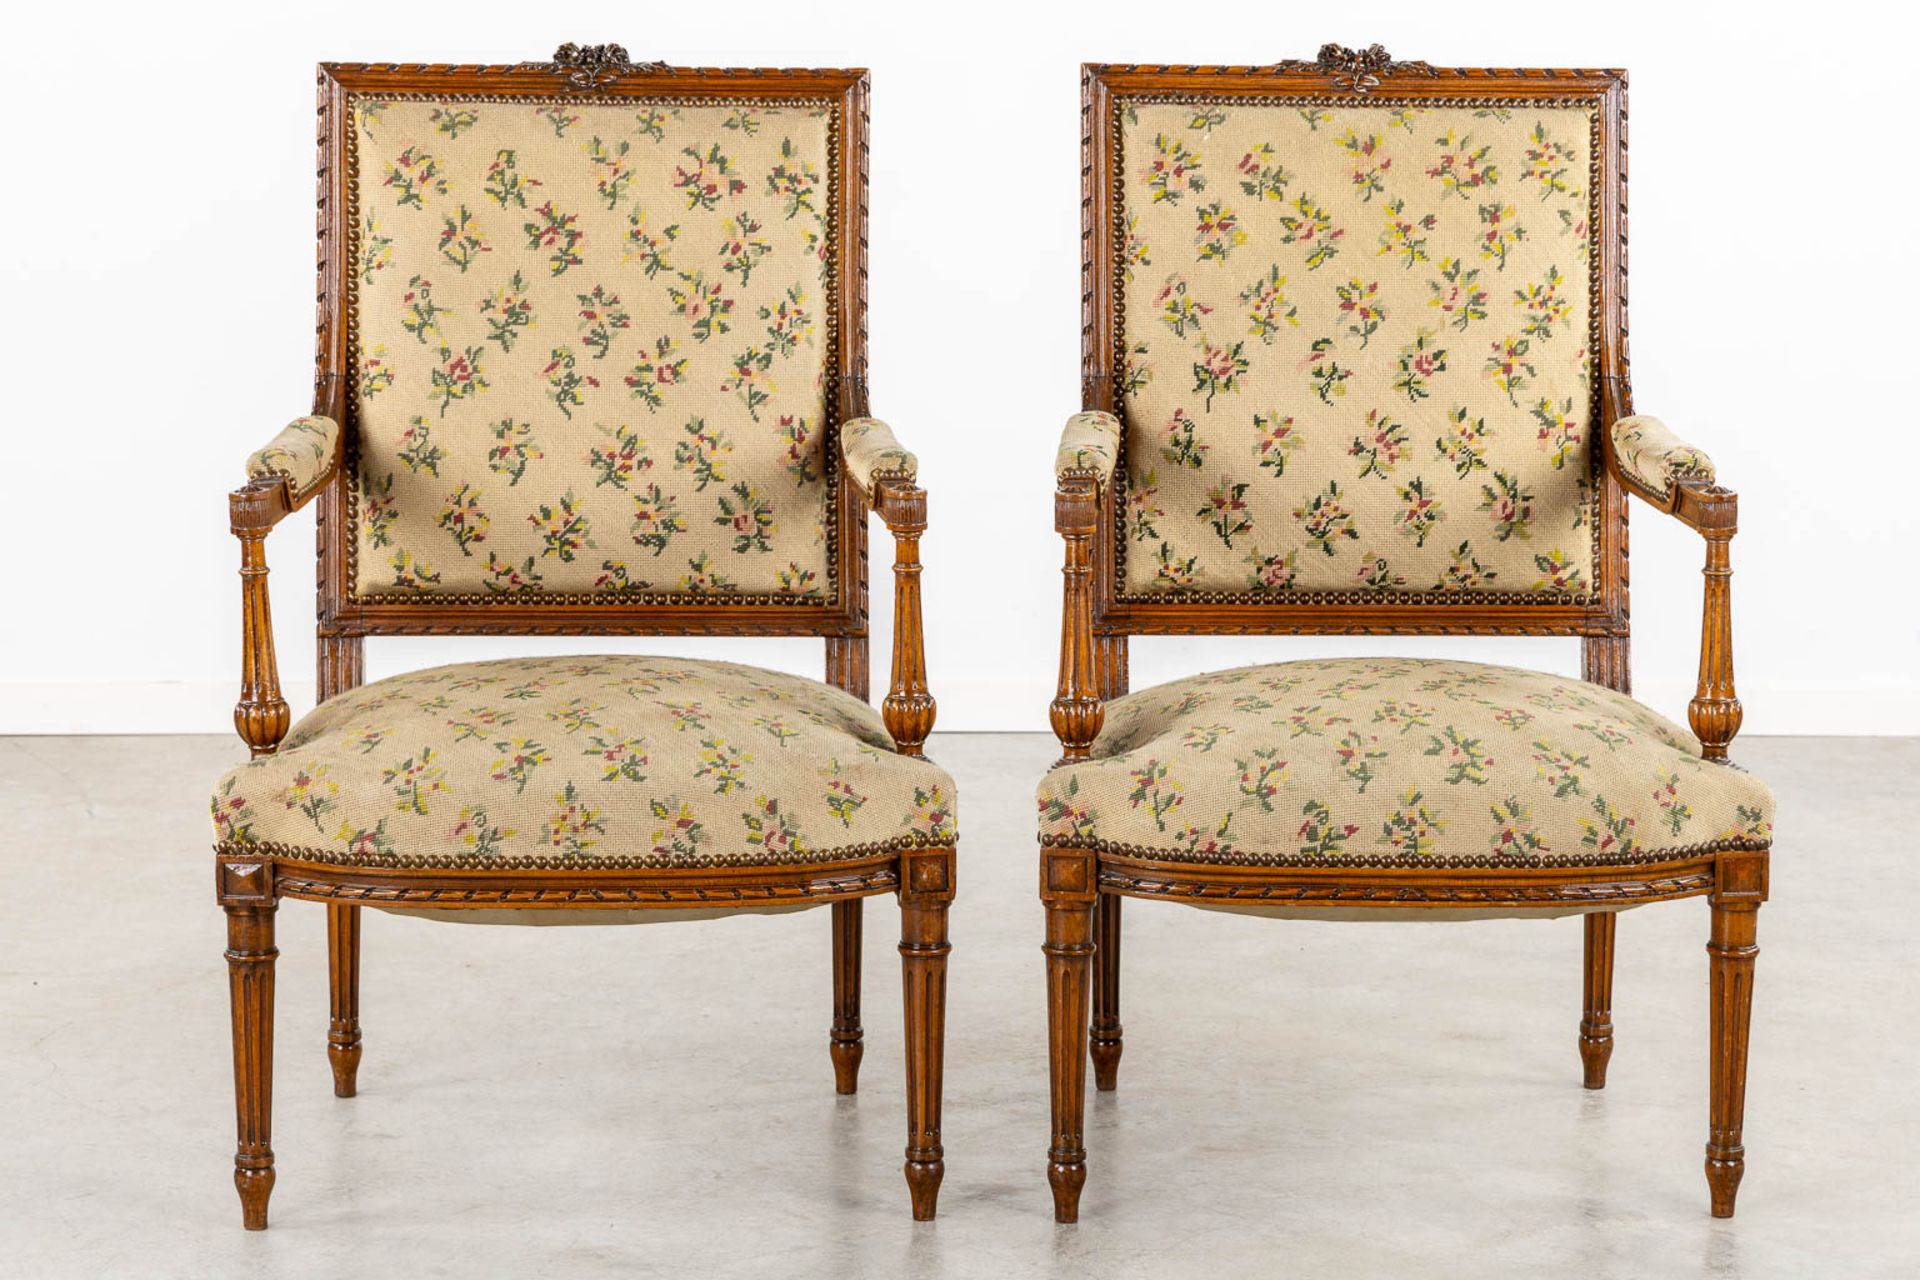 A pair of wood-sculptured armchairs with emboidered upholstry. Louis XVI style. (L:62 x W:64 x H:100 - Image 3 of 11